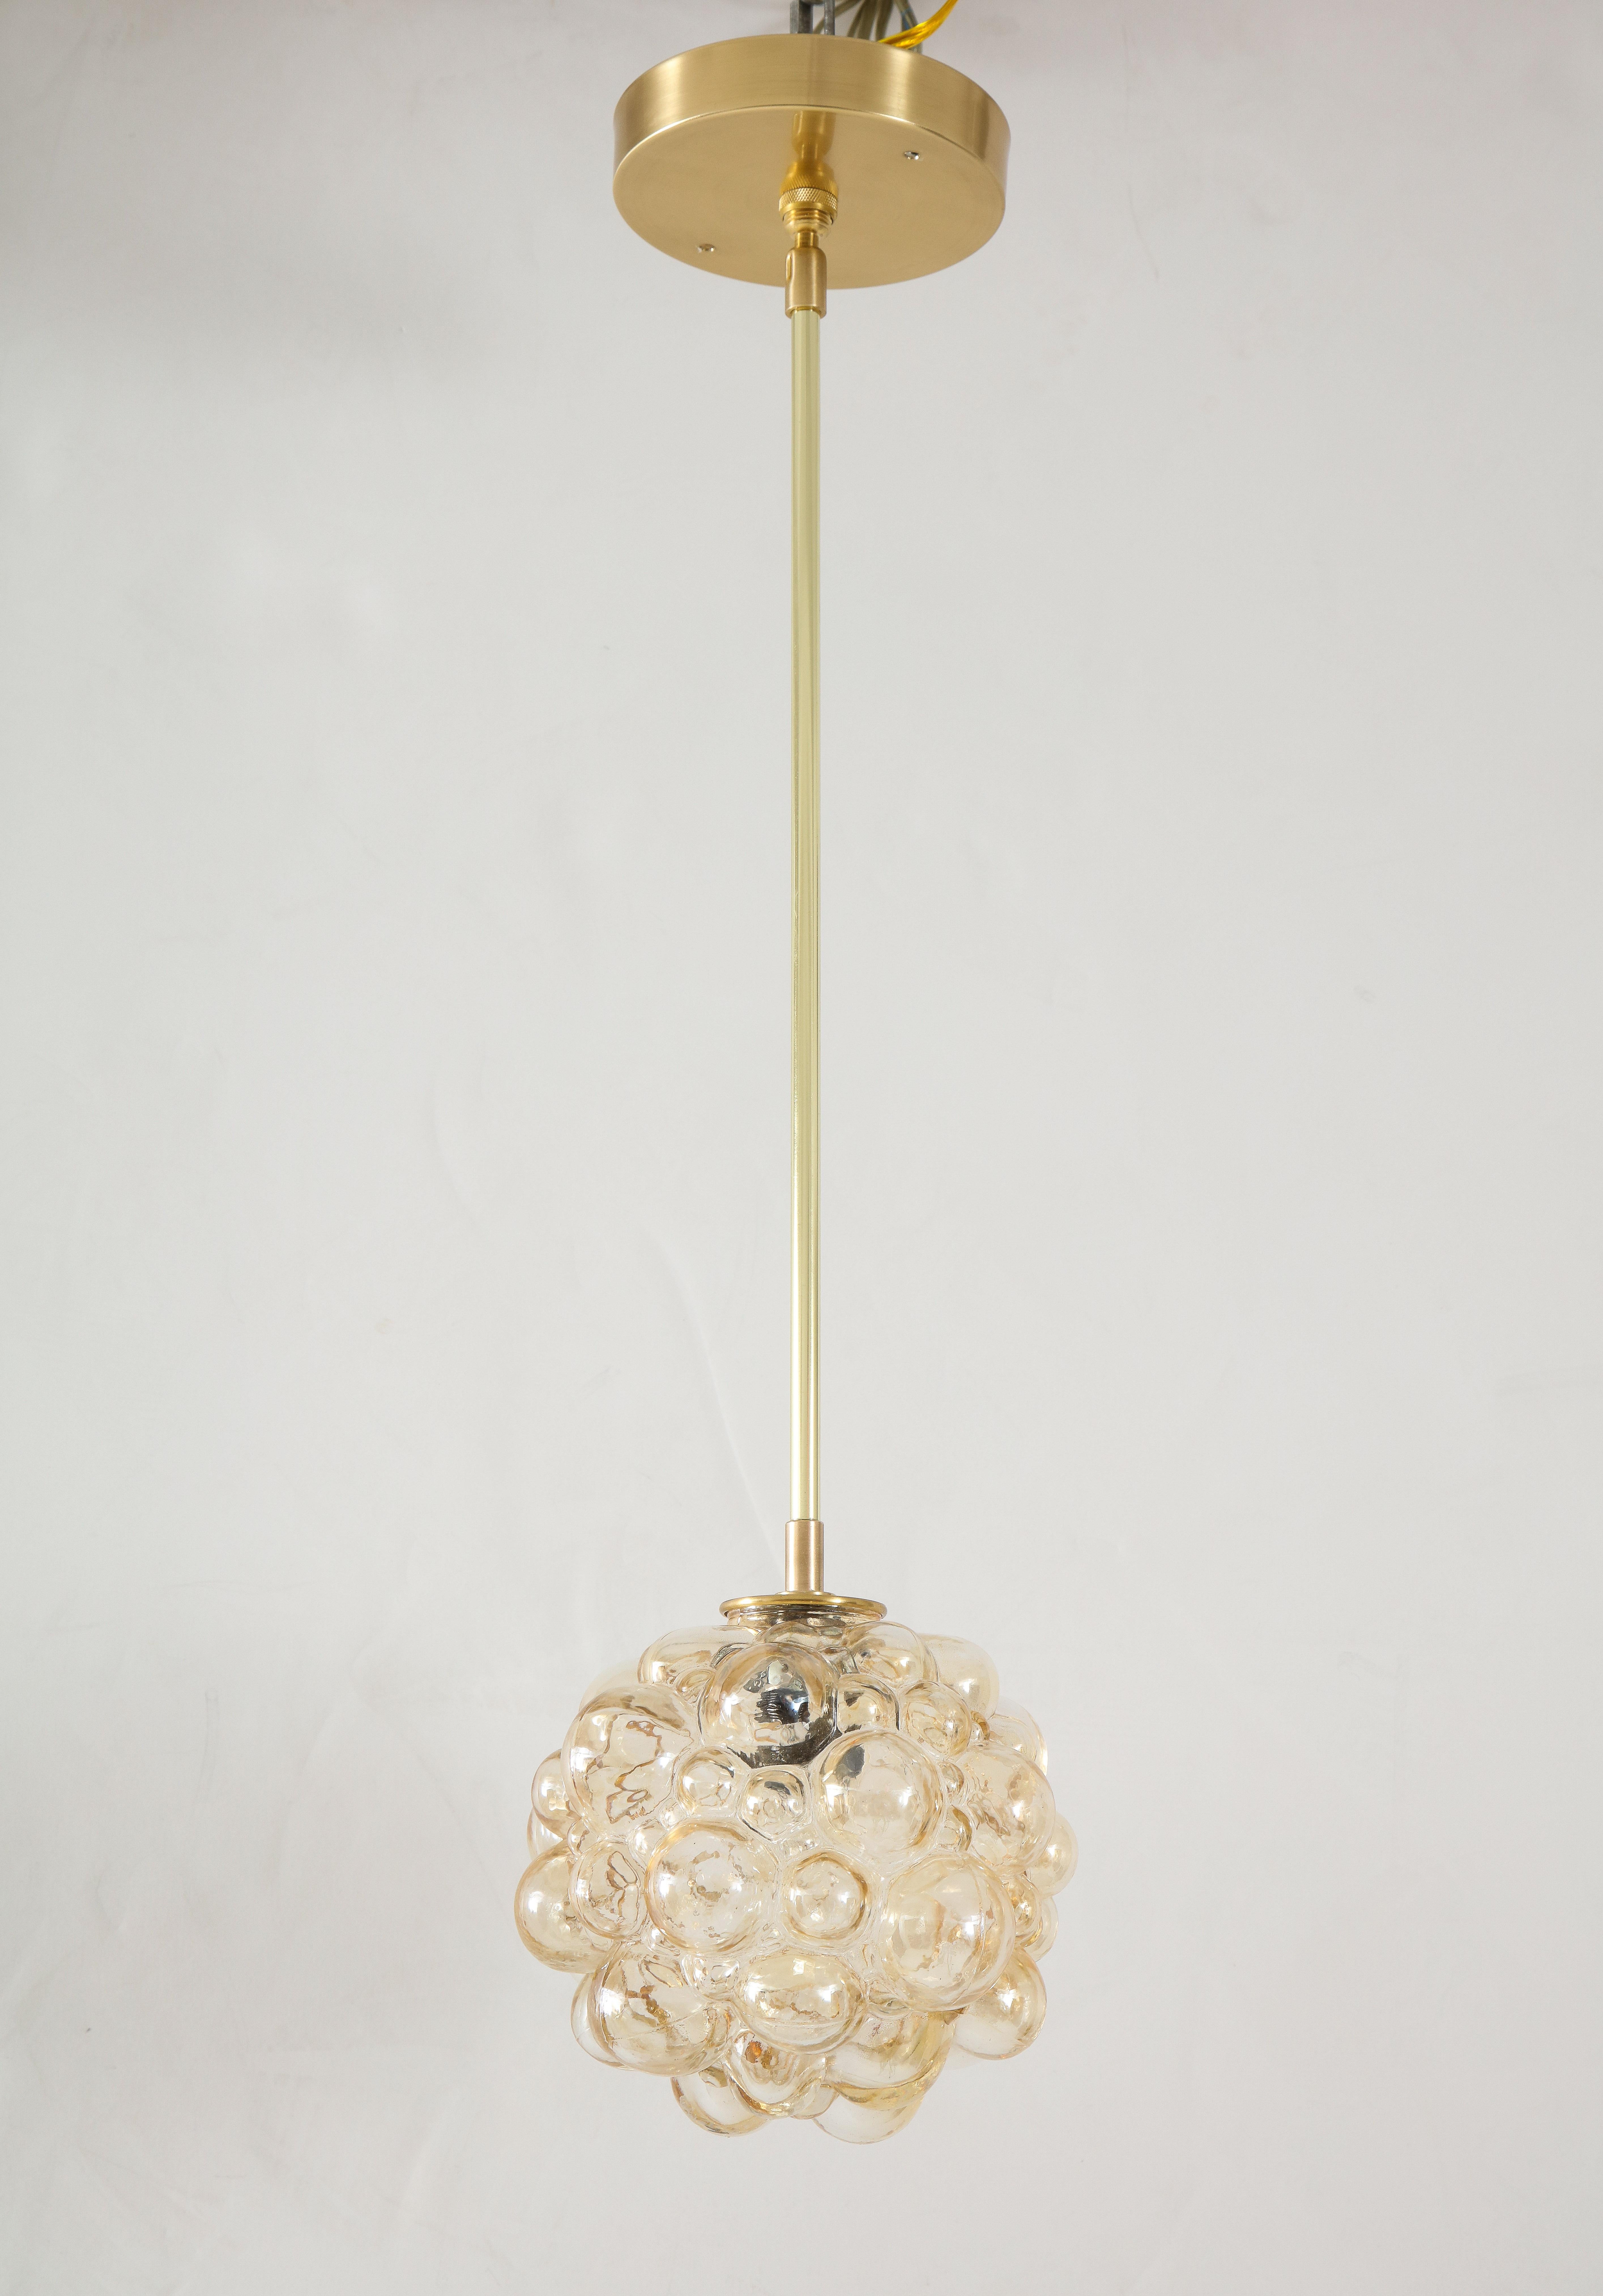 Helena Tynell champagne bubble glass pendants.
The glass globes is supported by a polished brass rod and matching ceiling canopy 
and are Newly rewired with a single candelabra light socket 40 watt Maximum.
The rod is 16